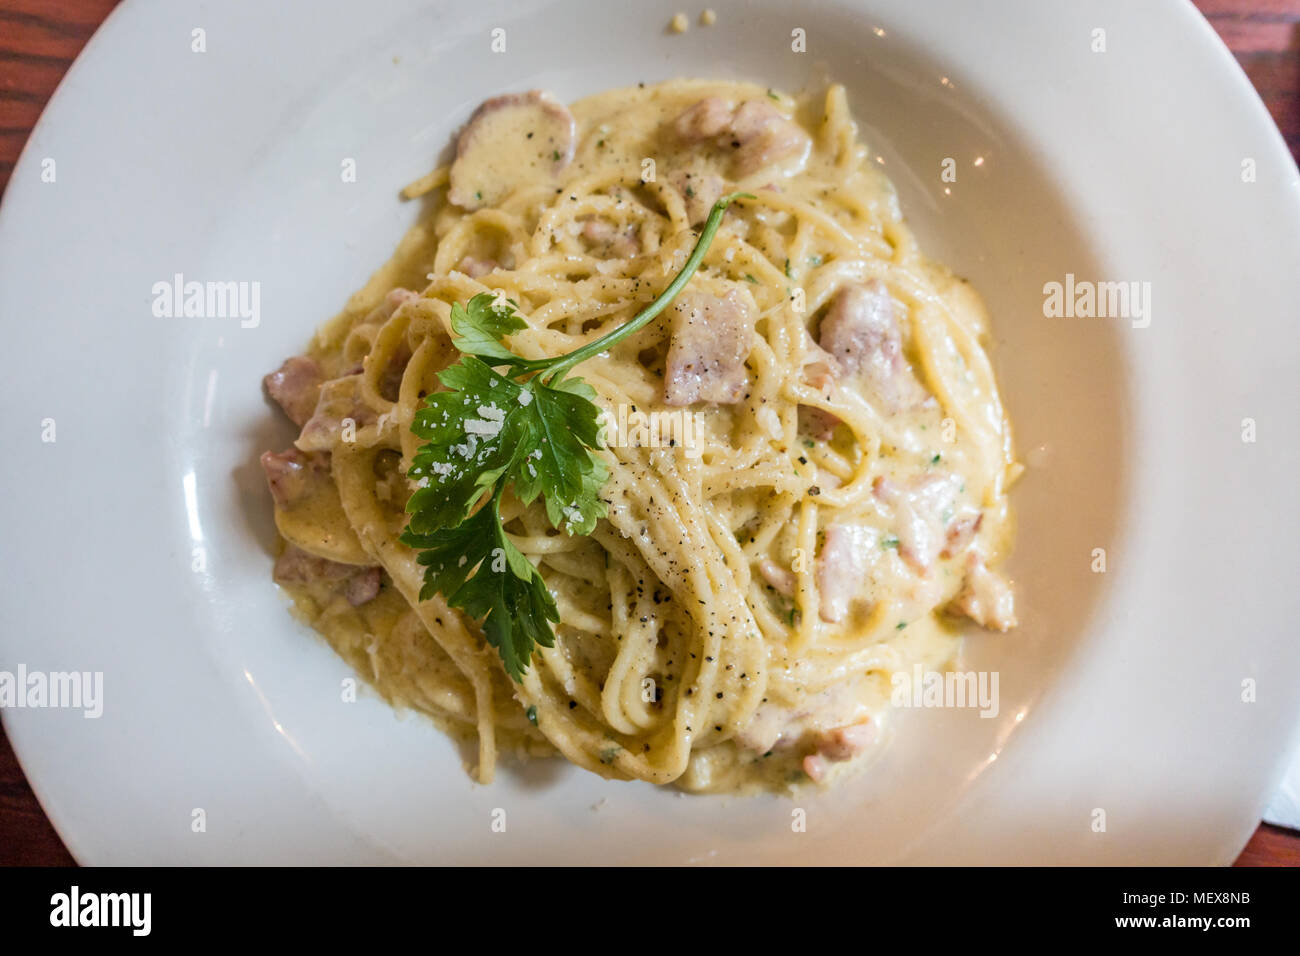 A close up view of a bowl of Spaghetti Carbonara garnished wiht a sprig of parsely. Stock Photo